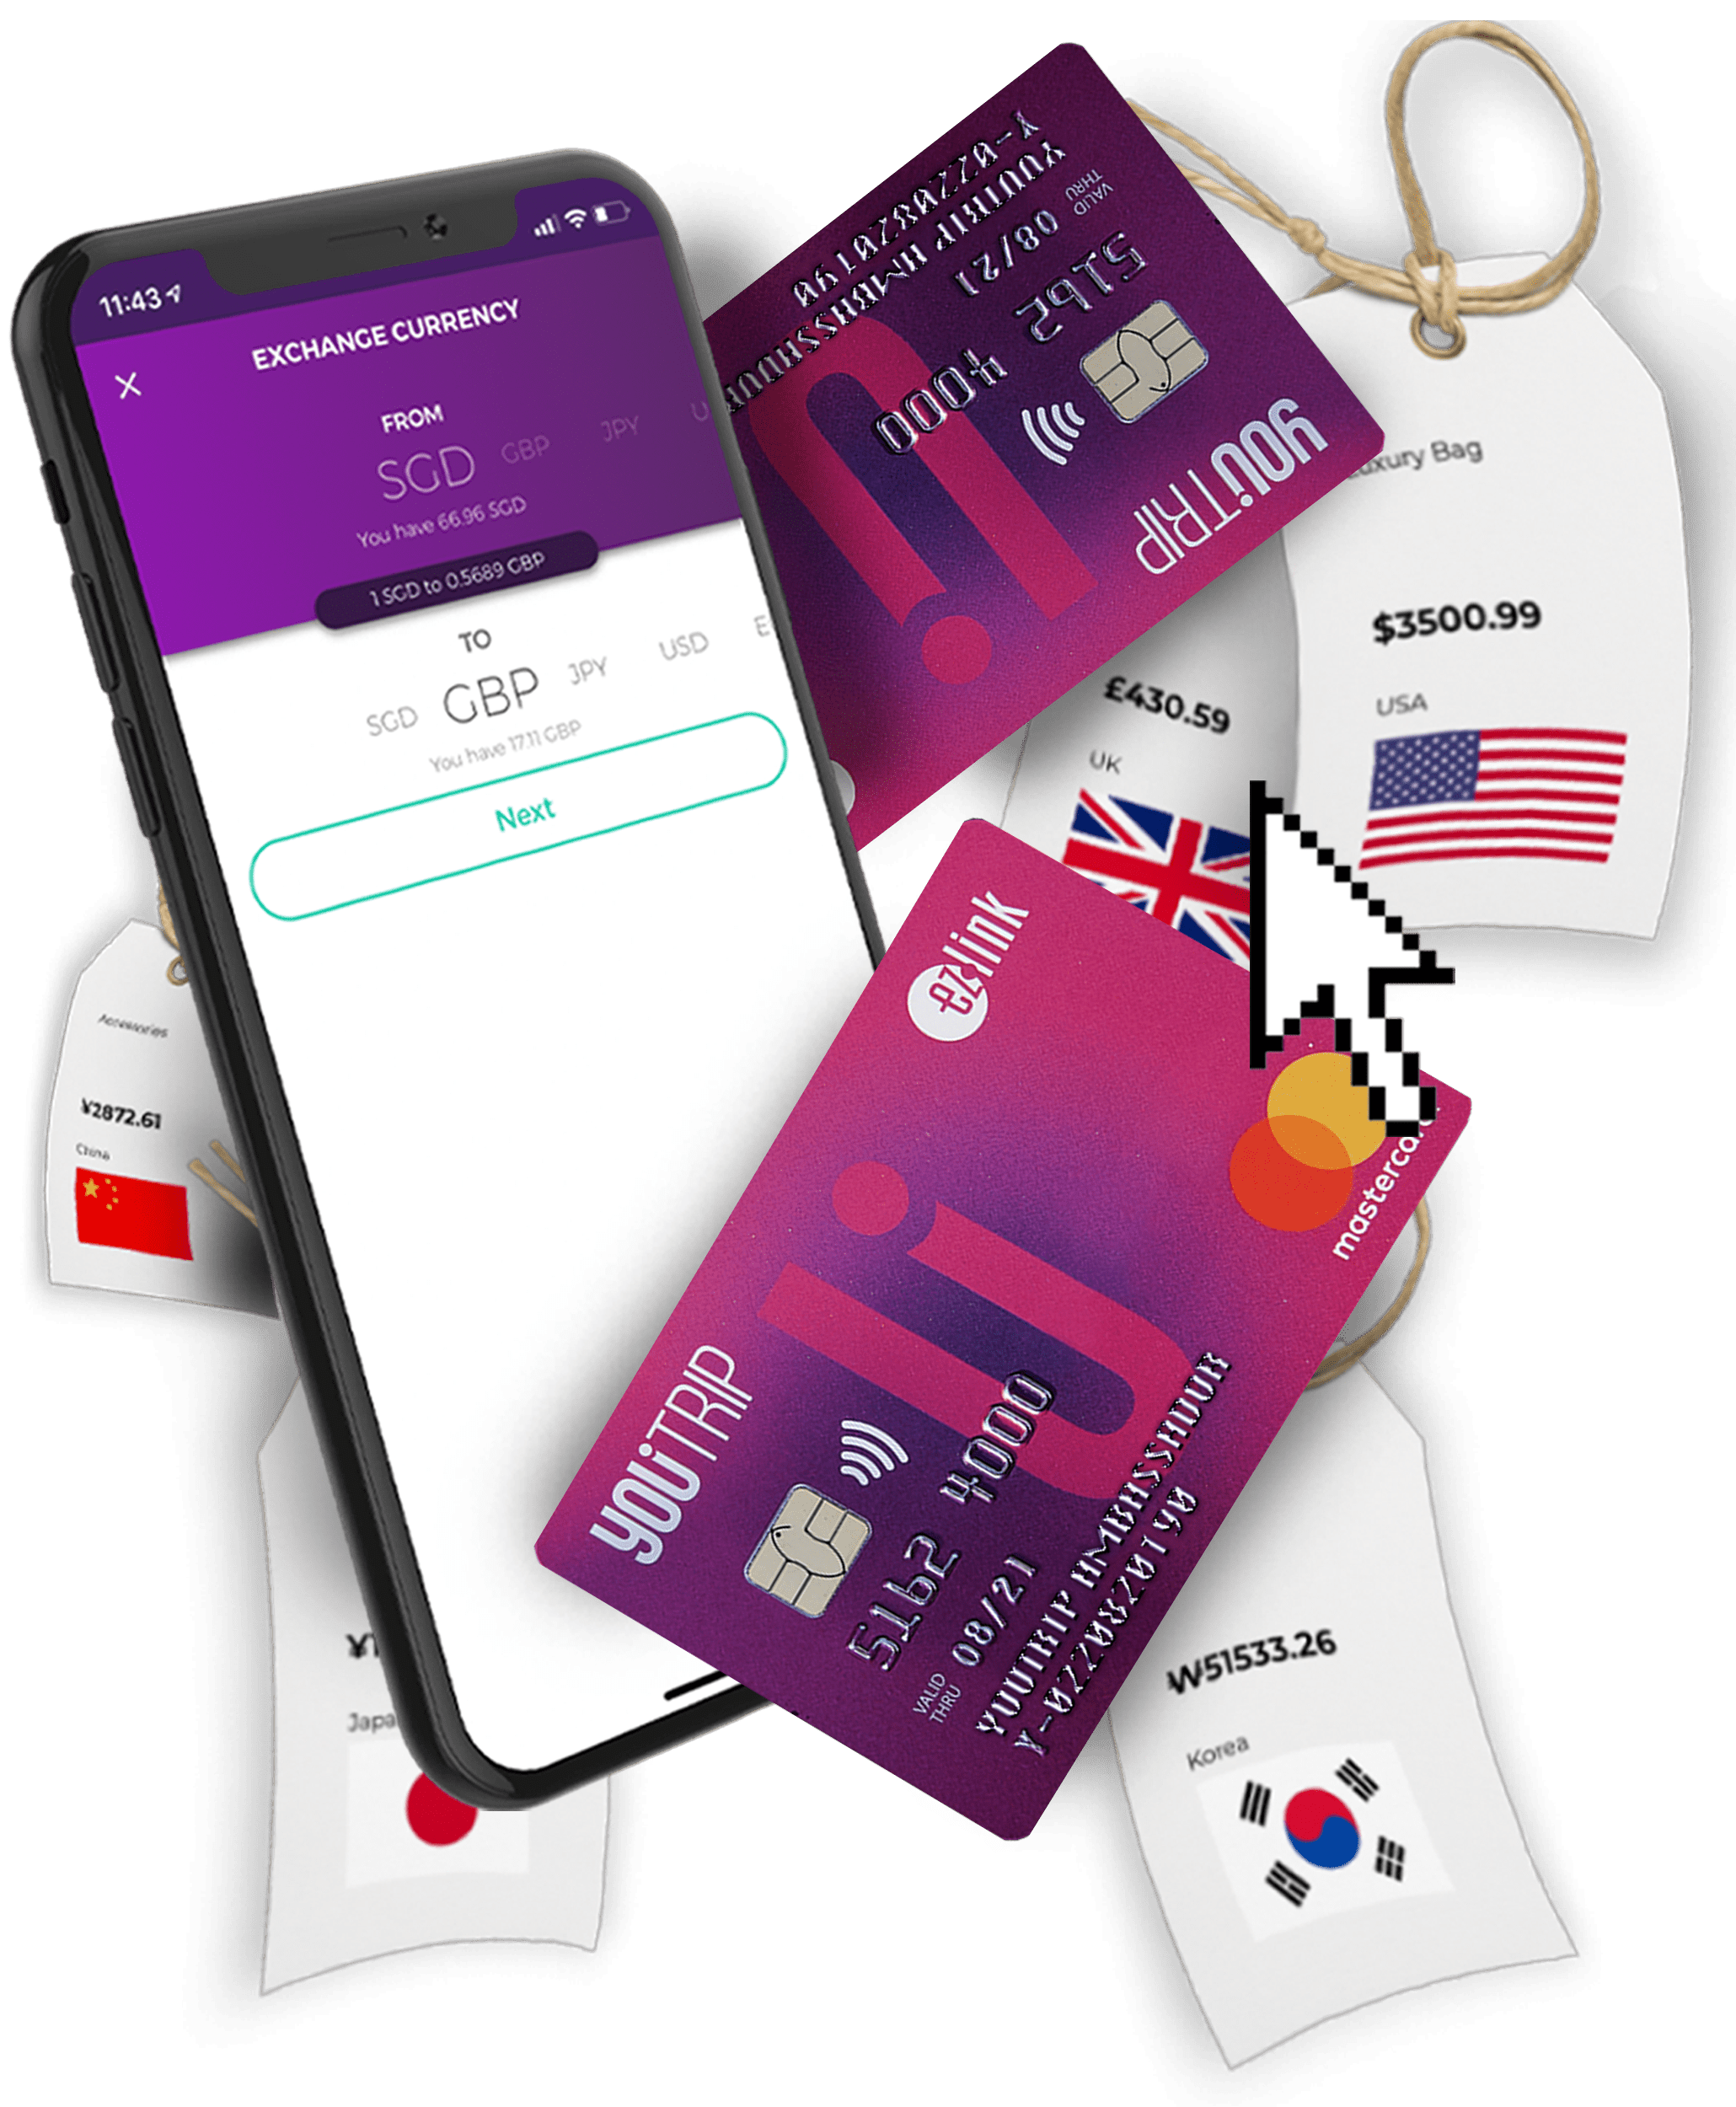 YouTrip – Multicurrency travel wallet and money changer in app